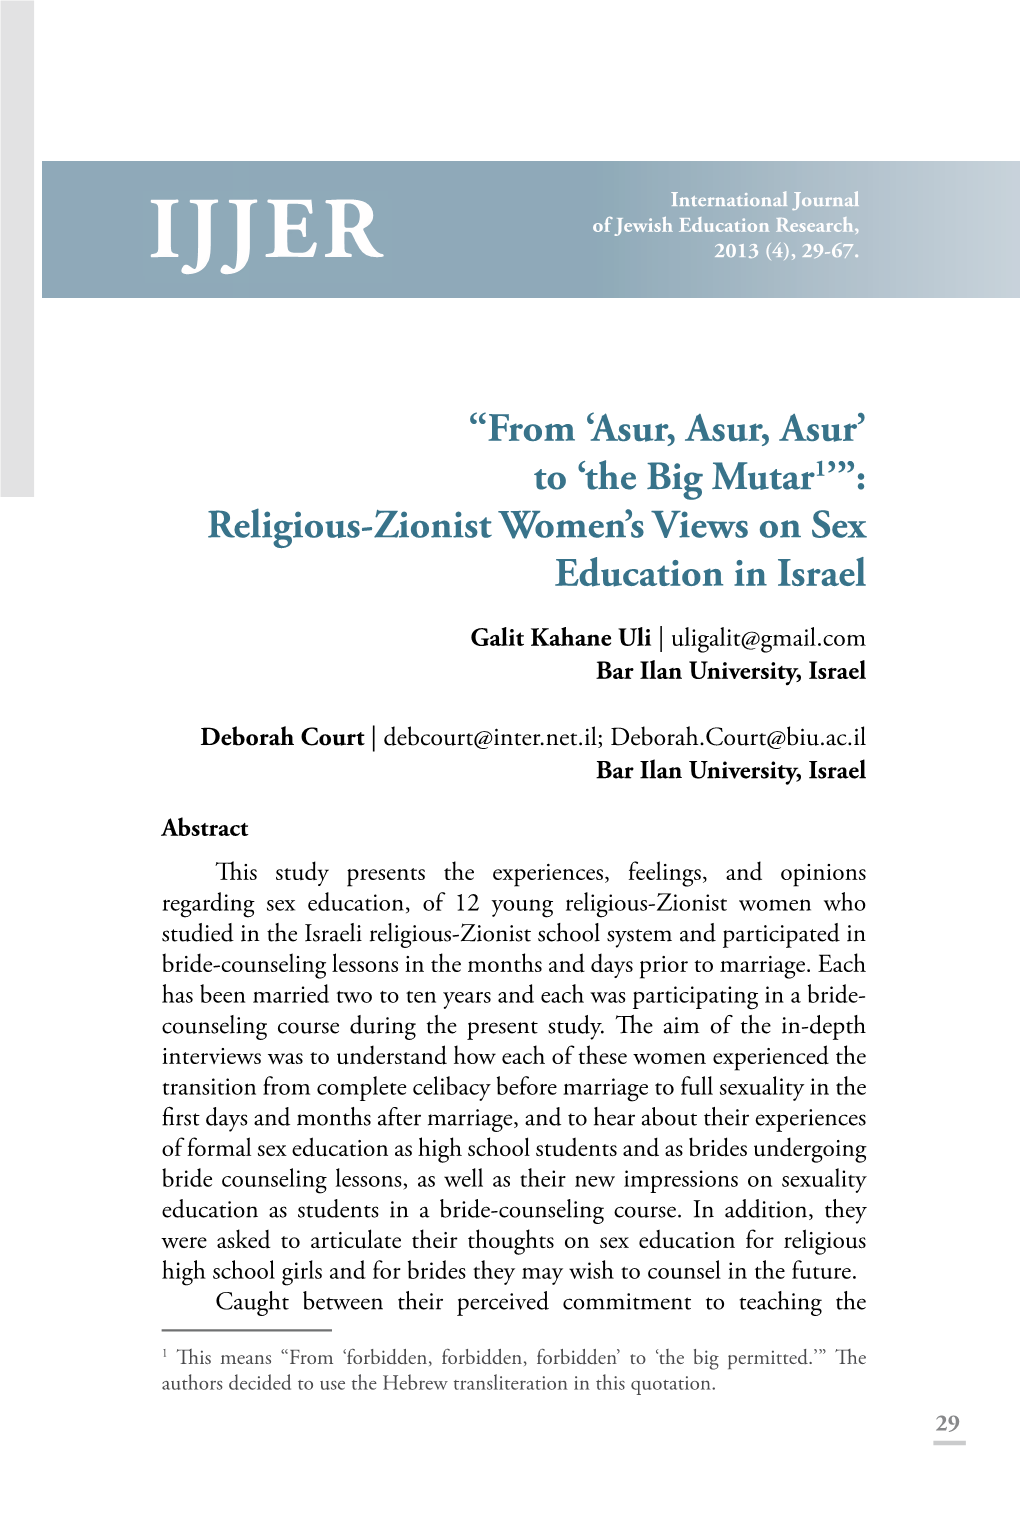 Religious-Zionist Women's Views on Sex Education in Israel